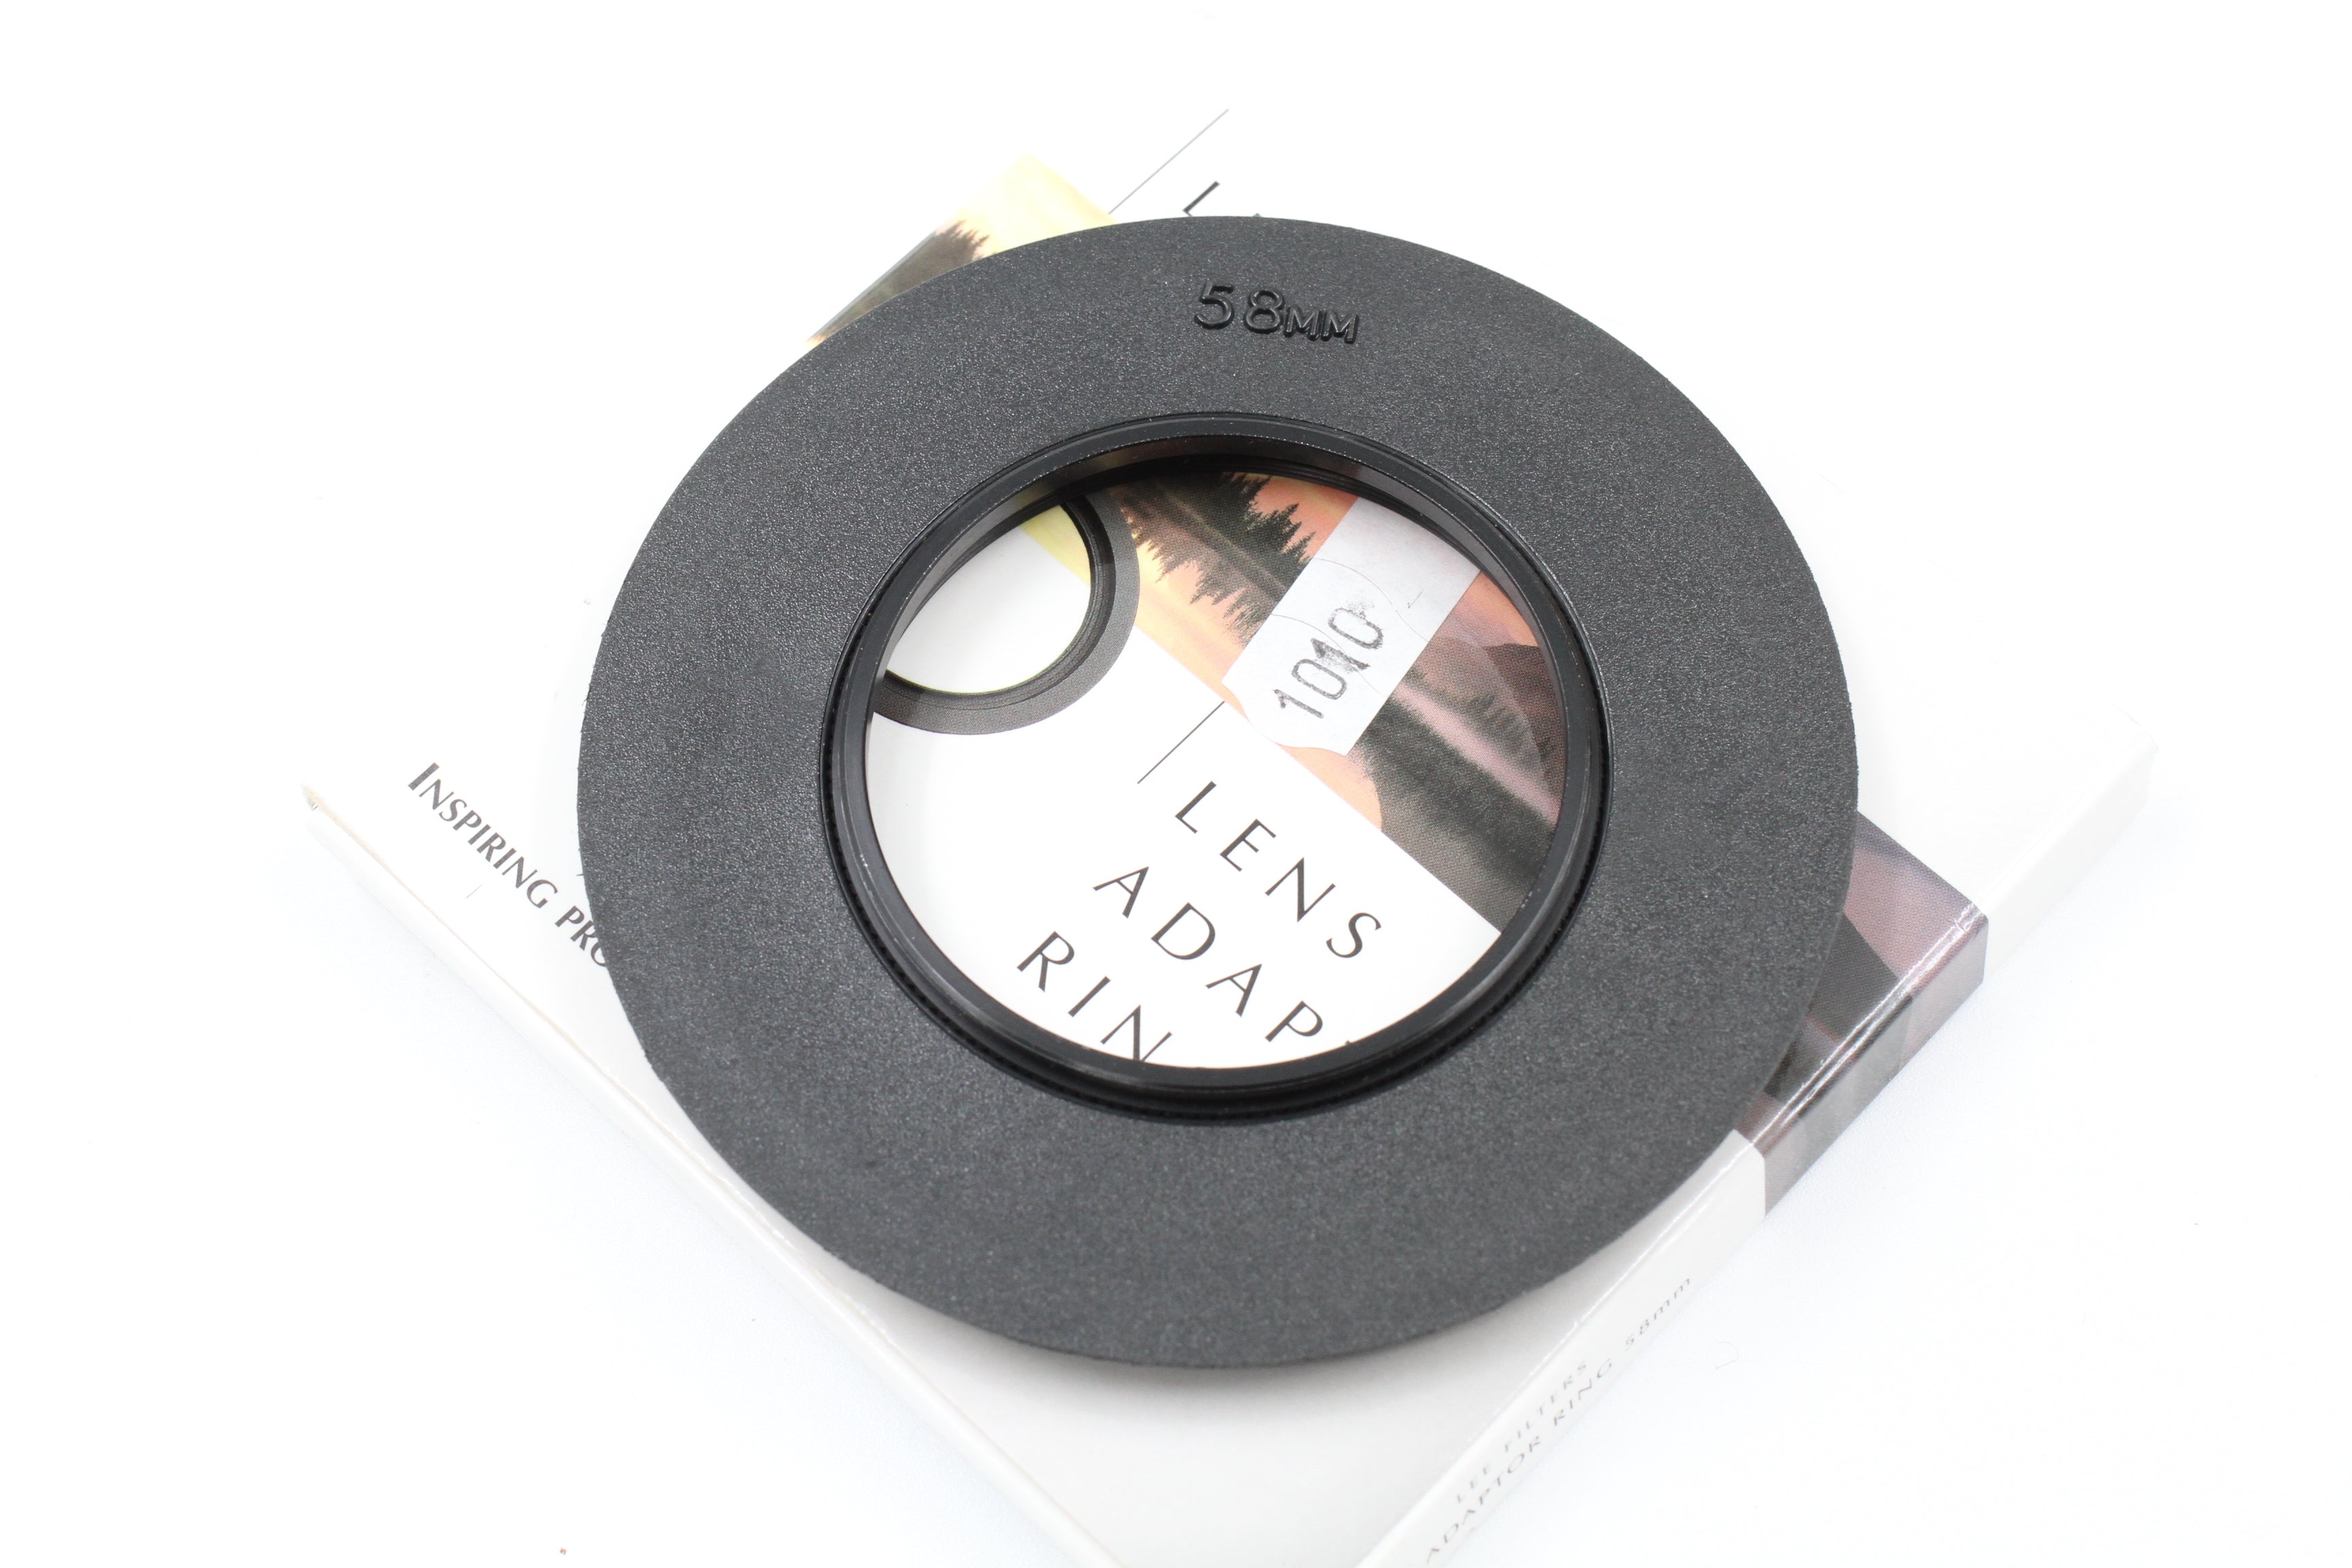 LEE 100 Lens Adapter Ring 58mm, Boxed